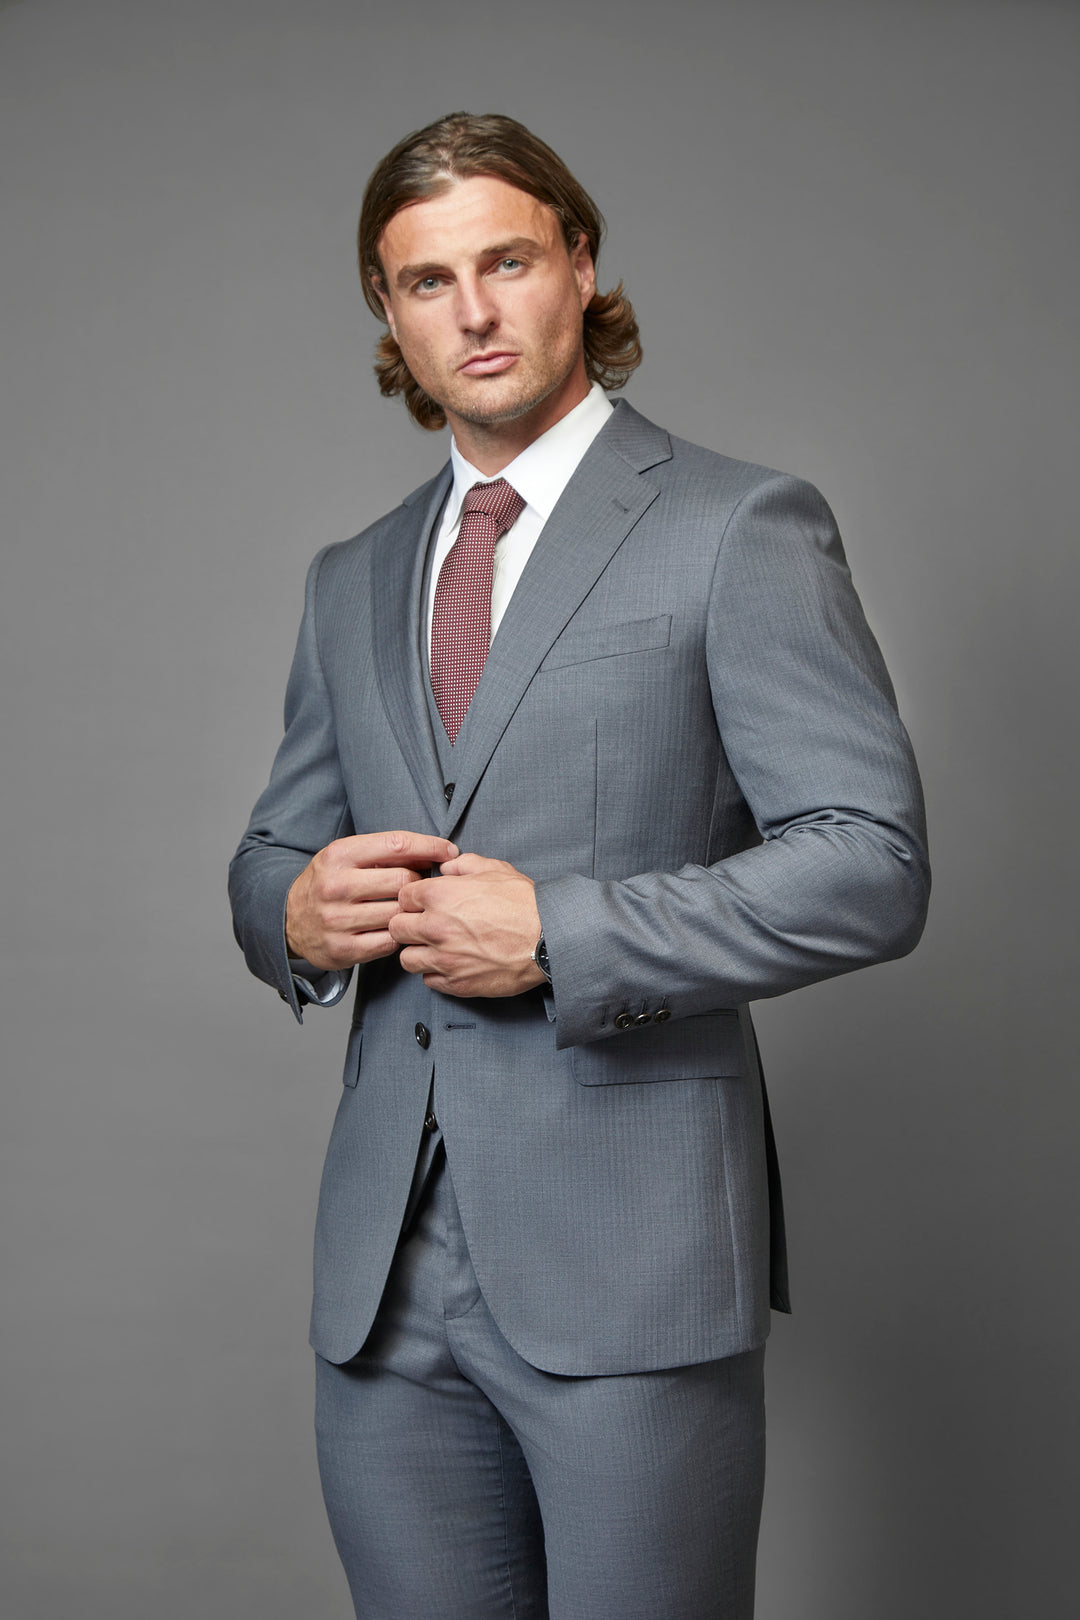  Tapered Menswear's Bespoke Suit, tailored for muscular builds with a perfect fit, crafted from 100% Australian wool in various colors and styles, ideal for athletic physiques